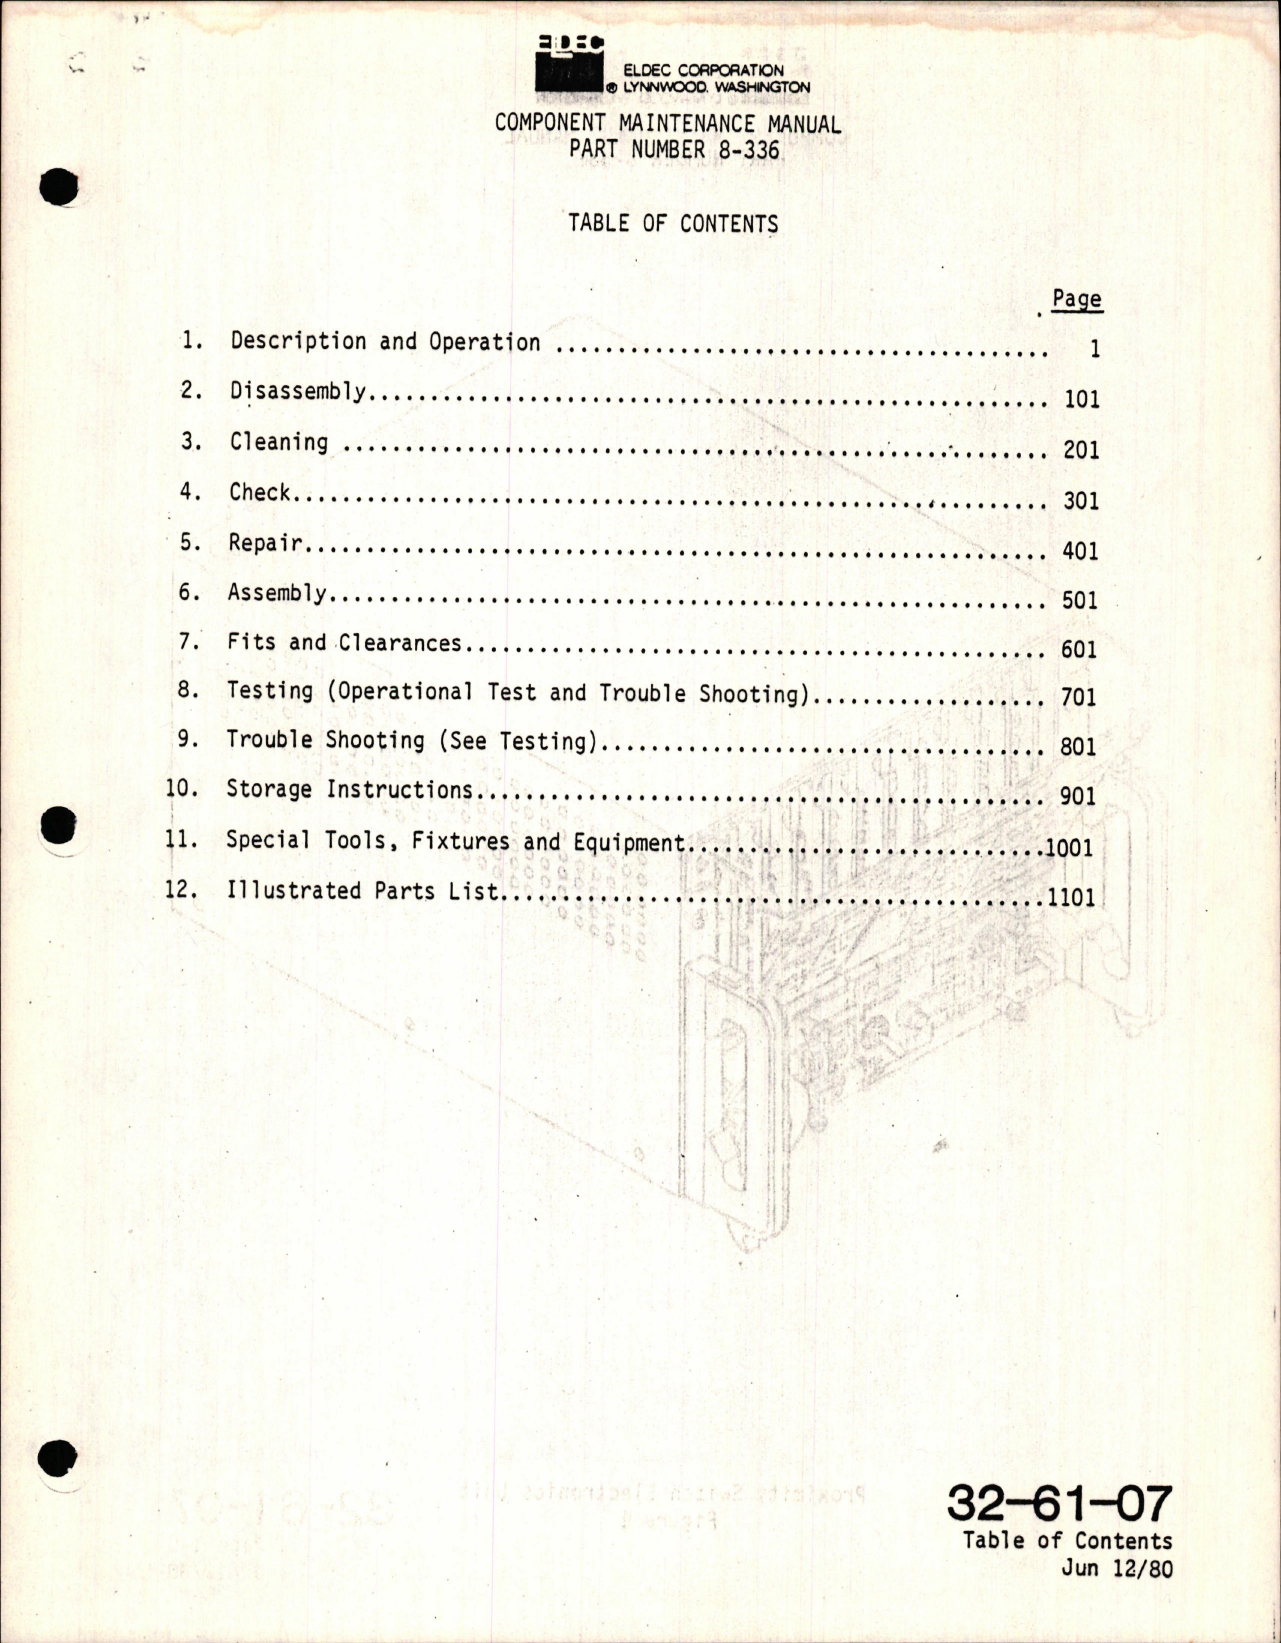 Sample page 5 from AirCorps Library document: Maintenance Manual with Illustrated Parts List for Proximity Switch Electronics Unit - Part 8-336-02